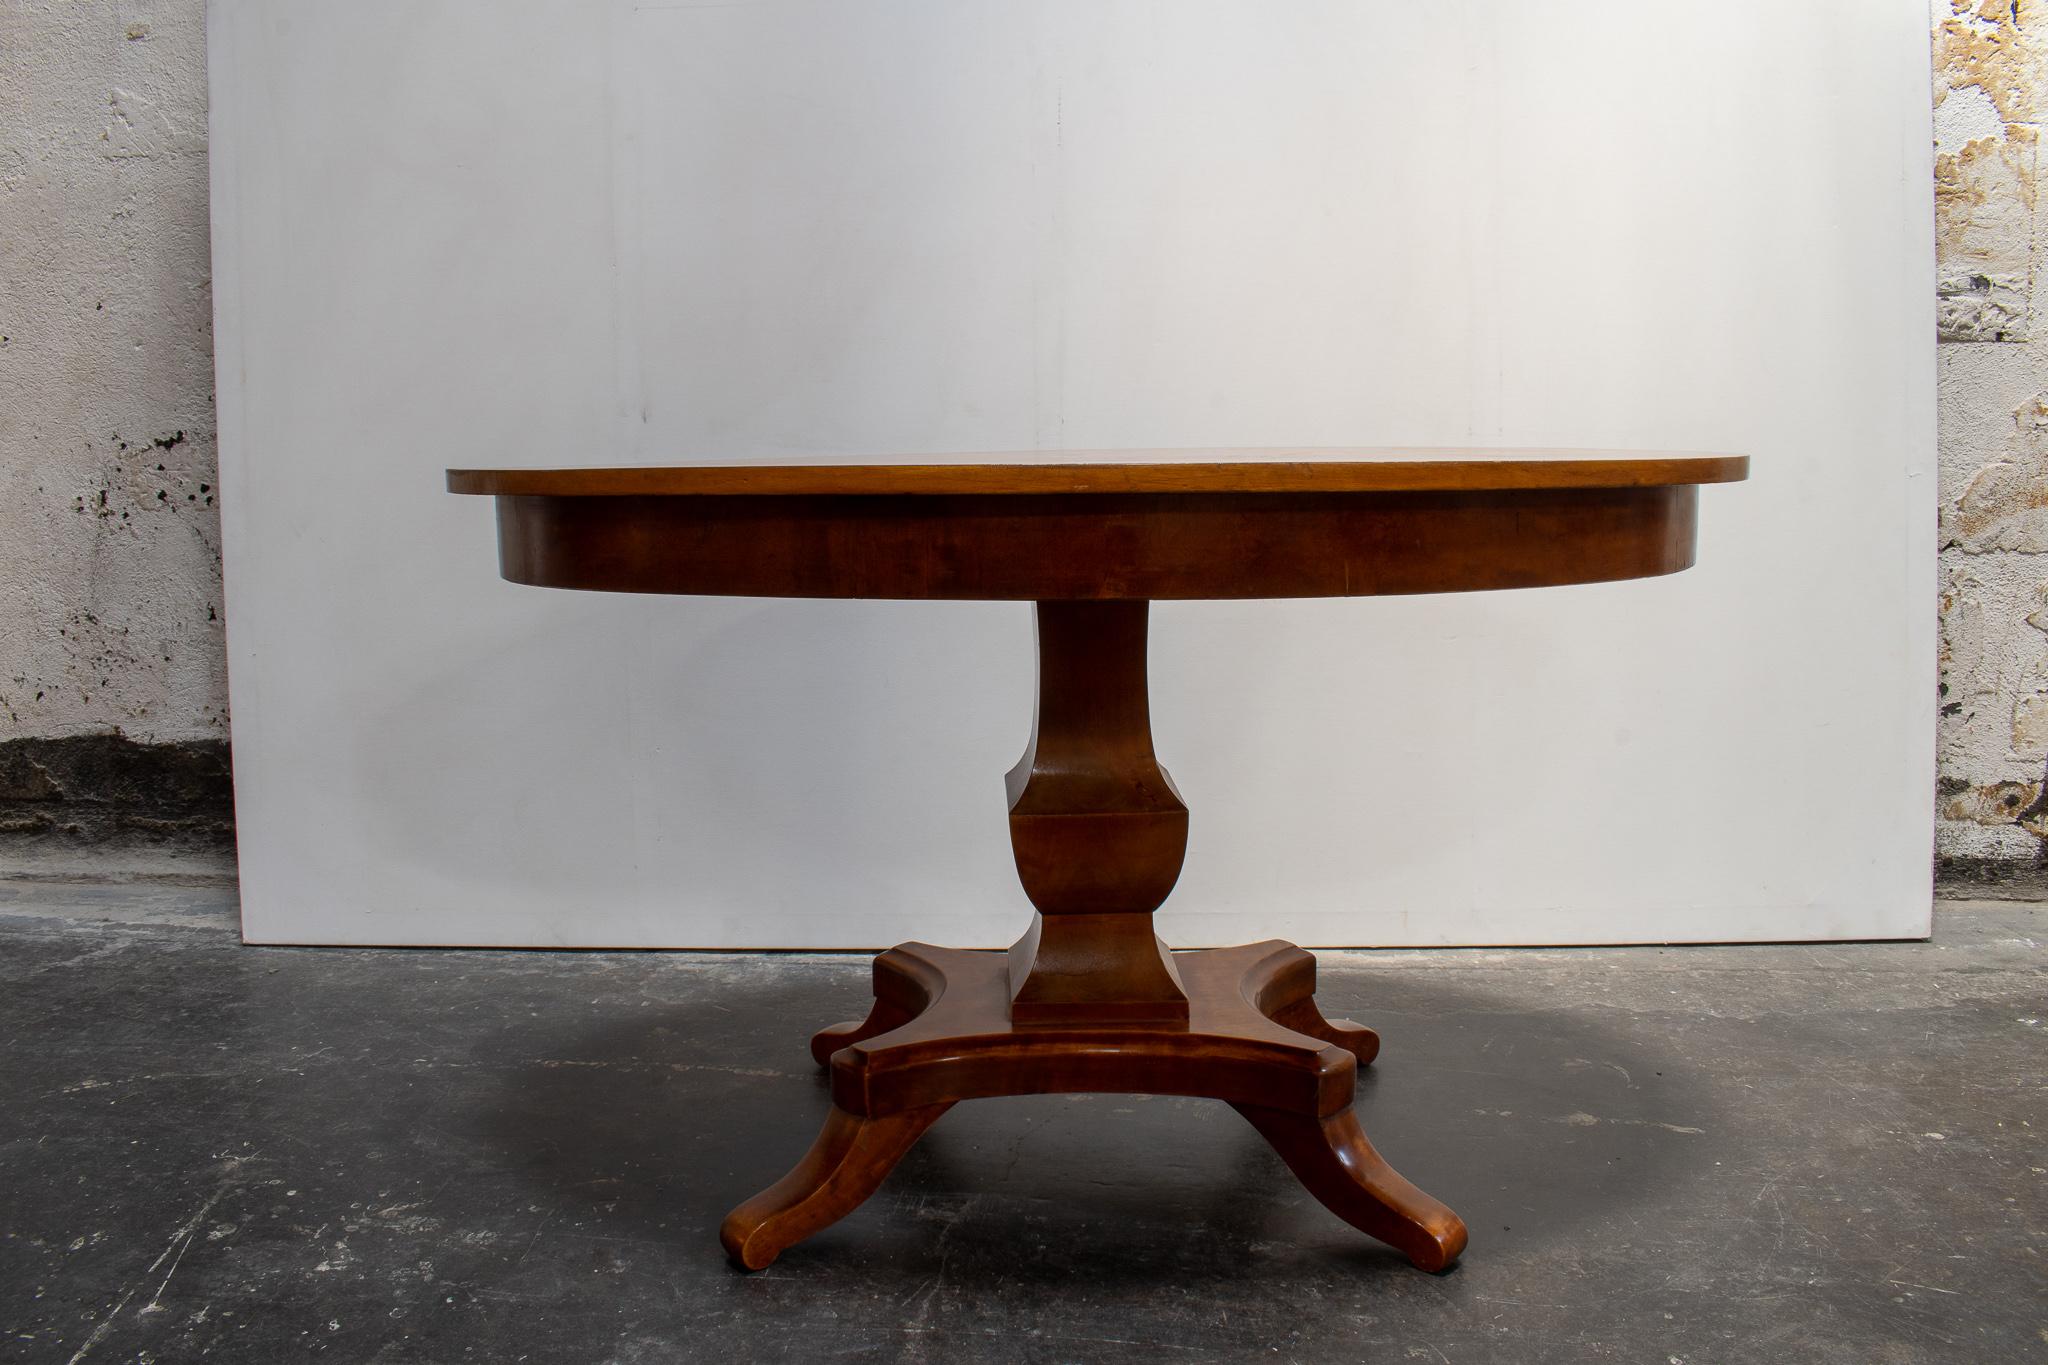 Swedish Karl Johan (Biedermeier) center or side table in mahogany. Oval top, gracefully shaped pedestal base, can be used as a center, end, or side table. Beautiful piece in excellent antique condition.